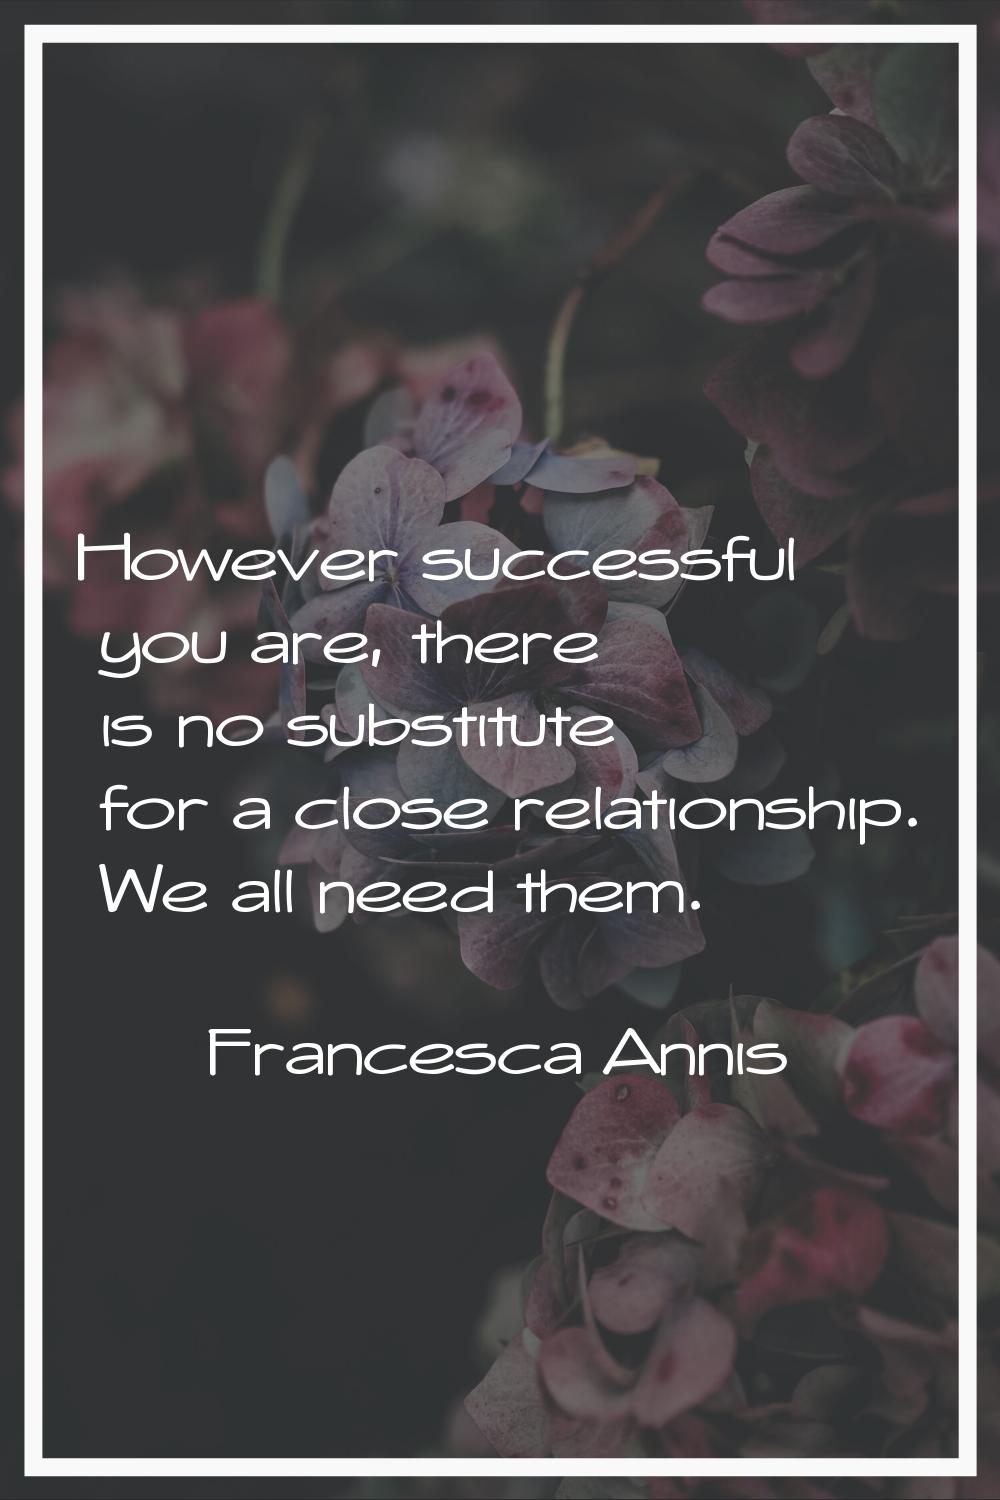 However successful you are, there is no substitute for a close relationship. We all need them.